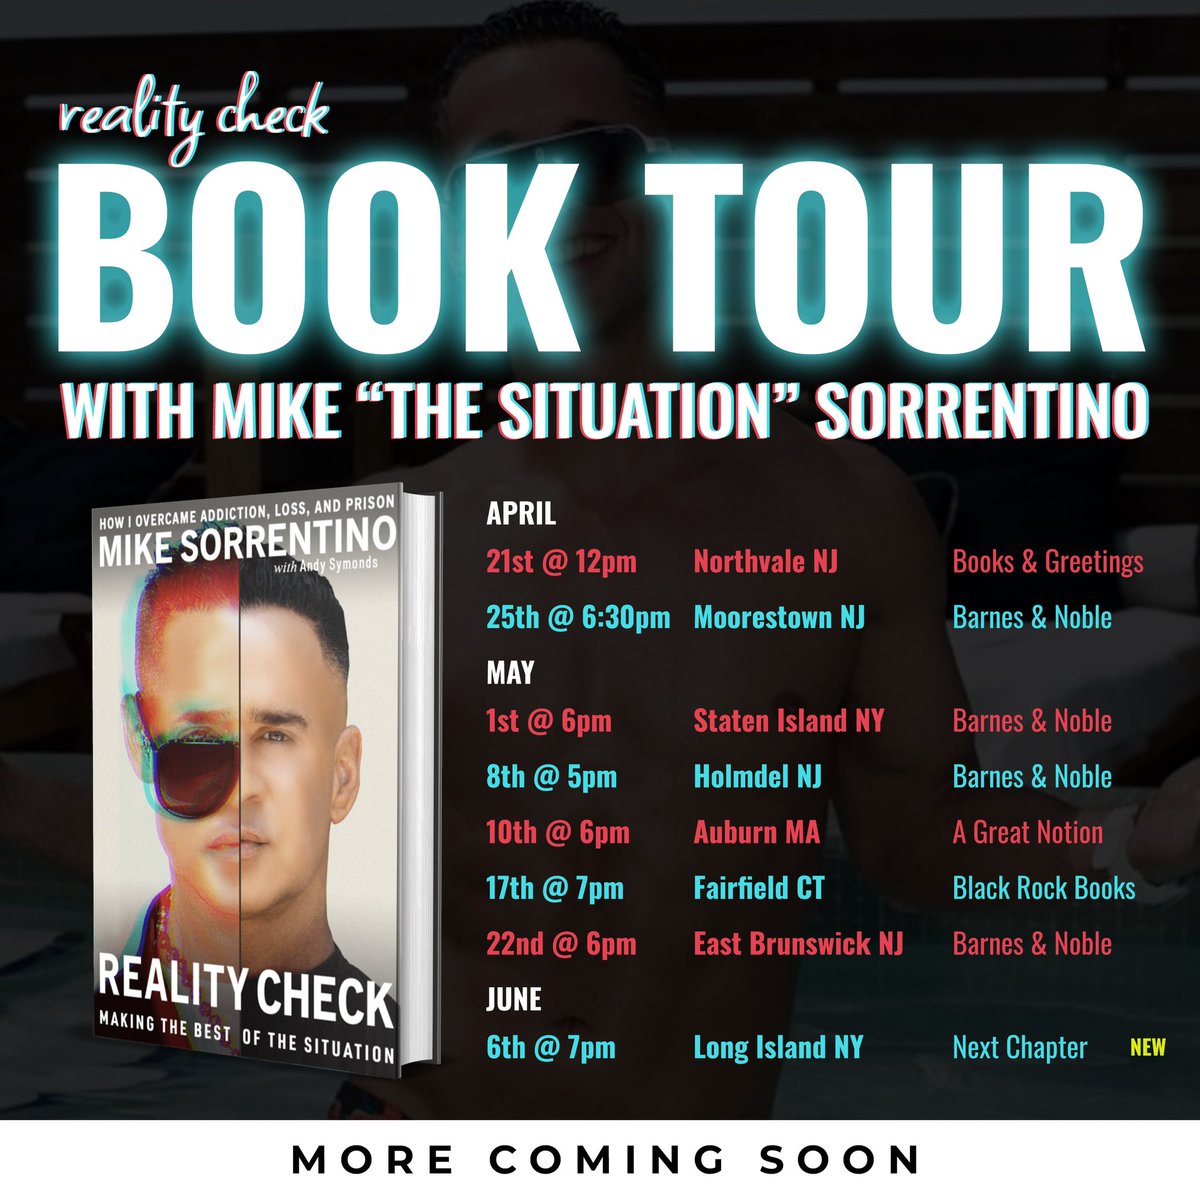 The Reality Check Book Tour Continues 🙏🏼📚Get ready & join me in a city near you for a book signing 📚 Save the dates and see you there‼️